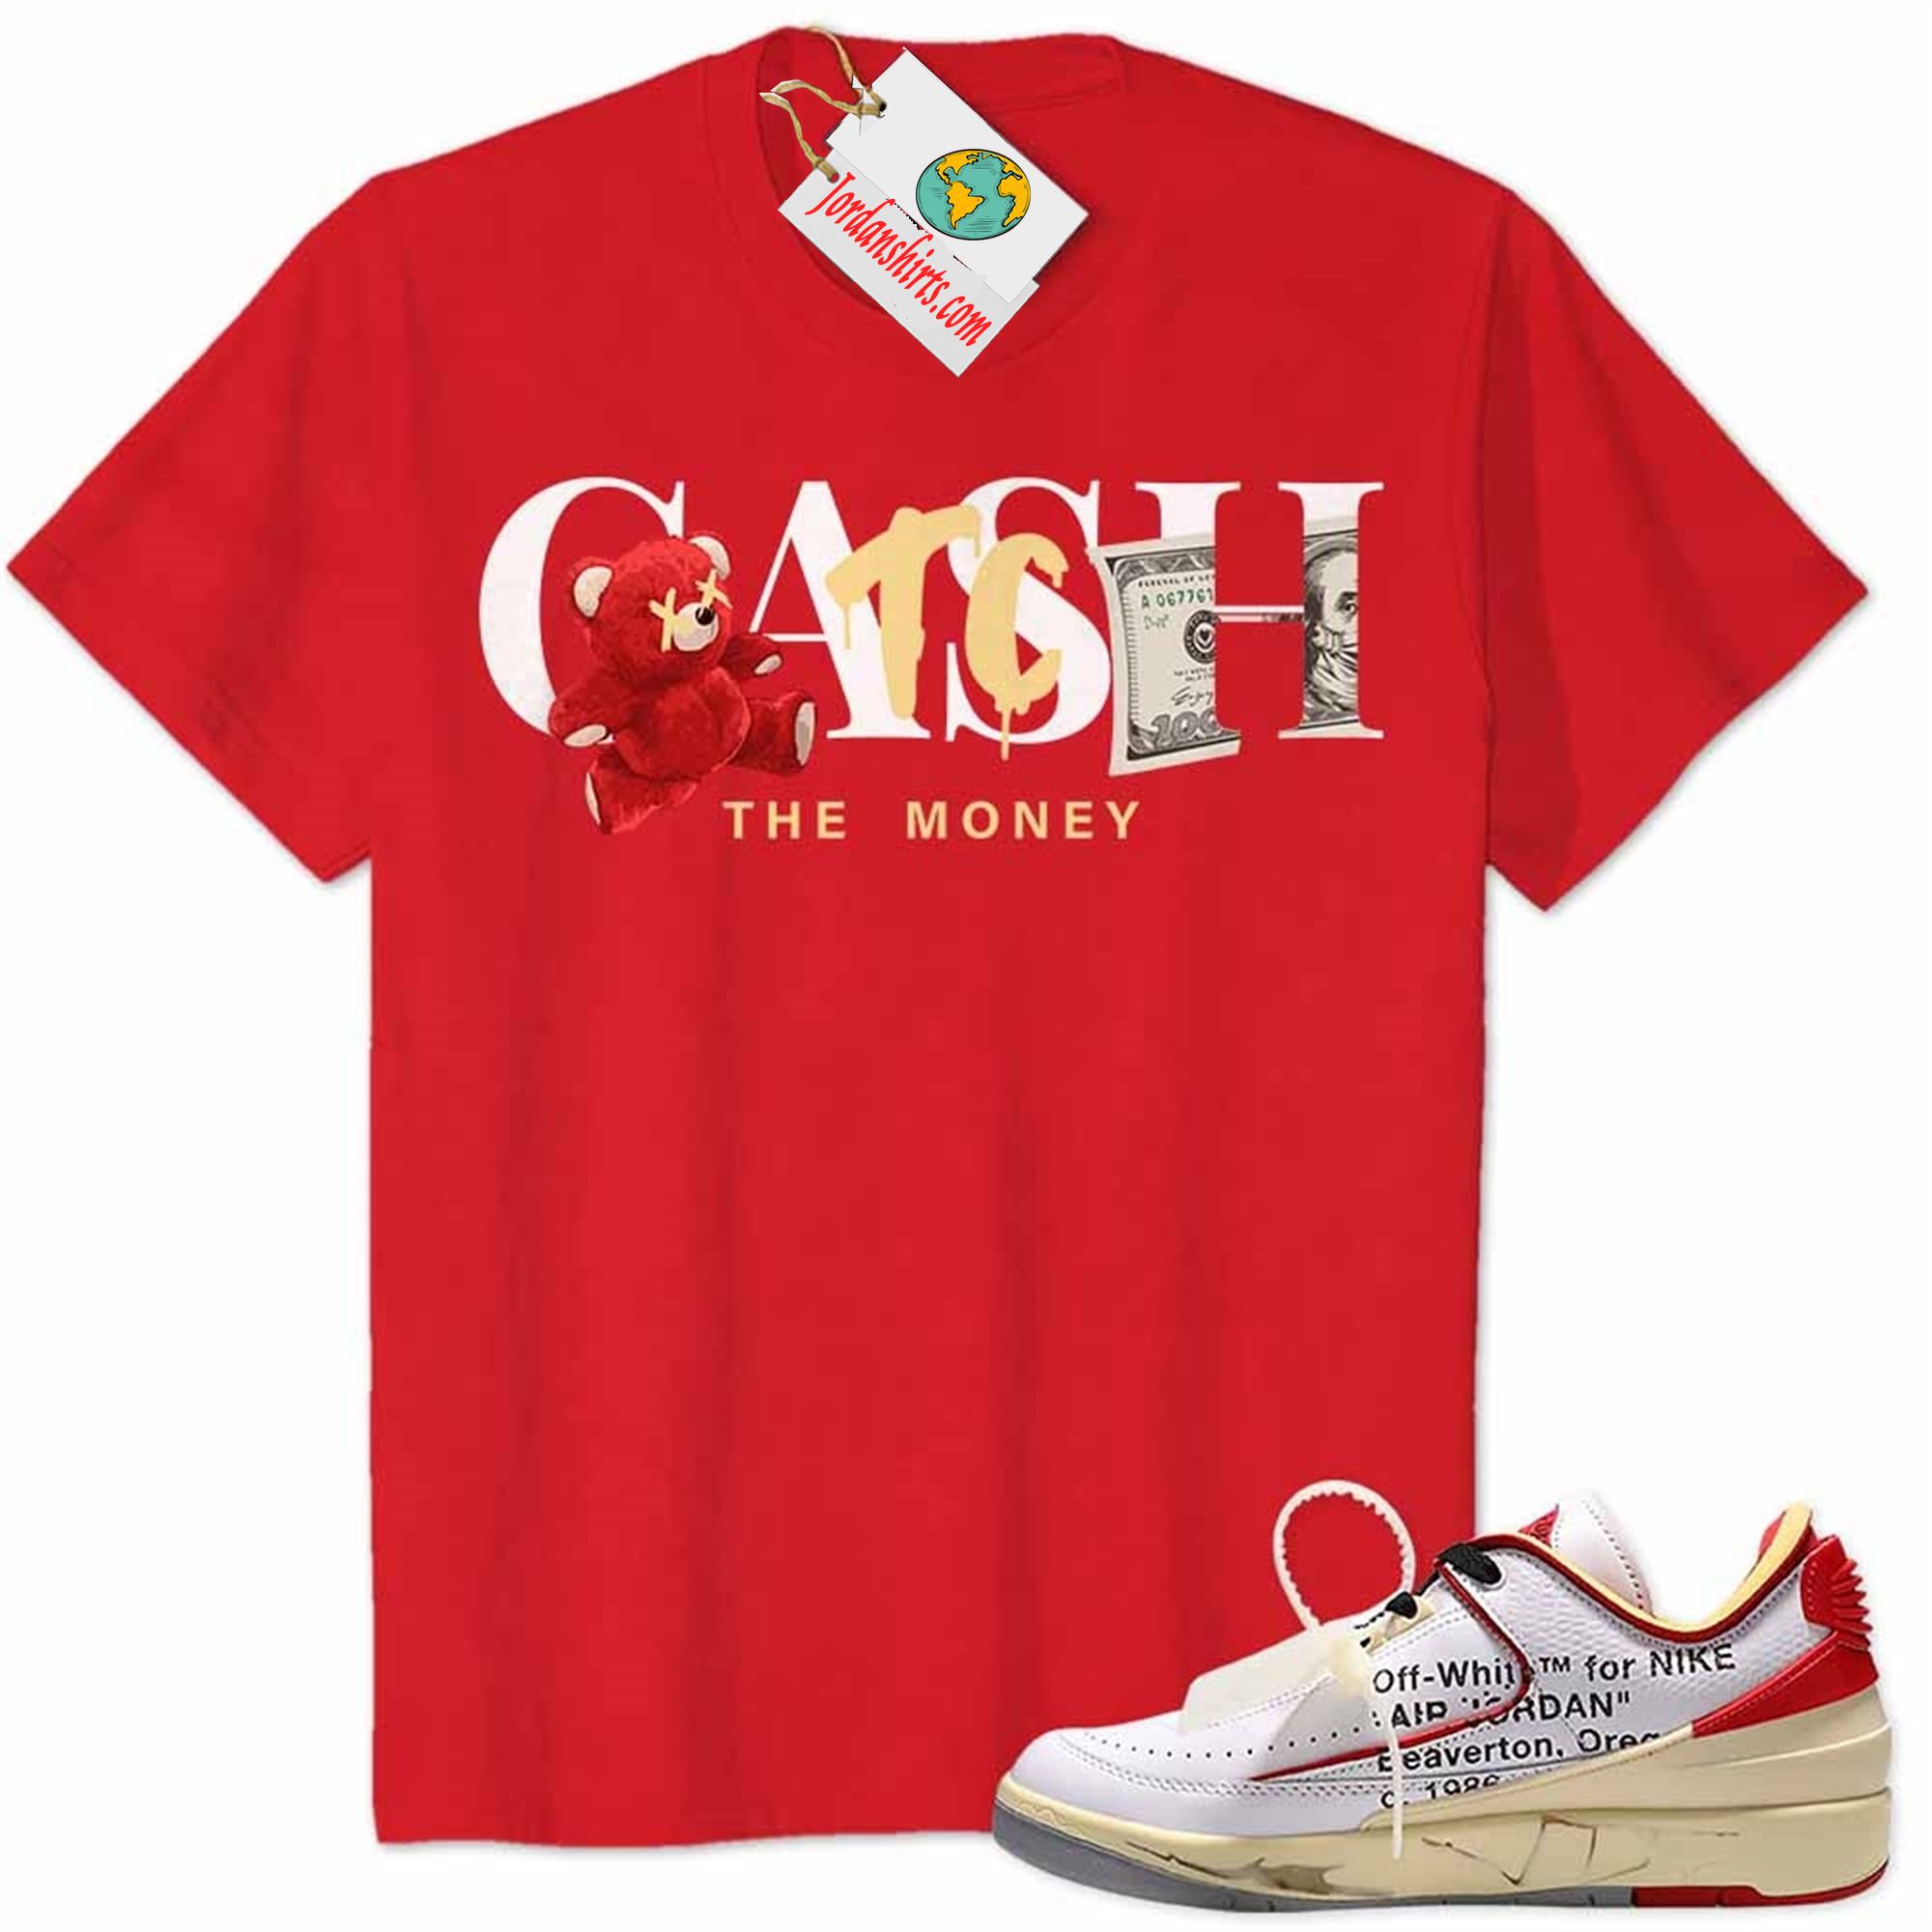 Jordan 2 Shirt, Cash Catch The Money Teddy Bear Red Air Jordan 2 Low White Red Off-white 2s Size Up To 5xl